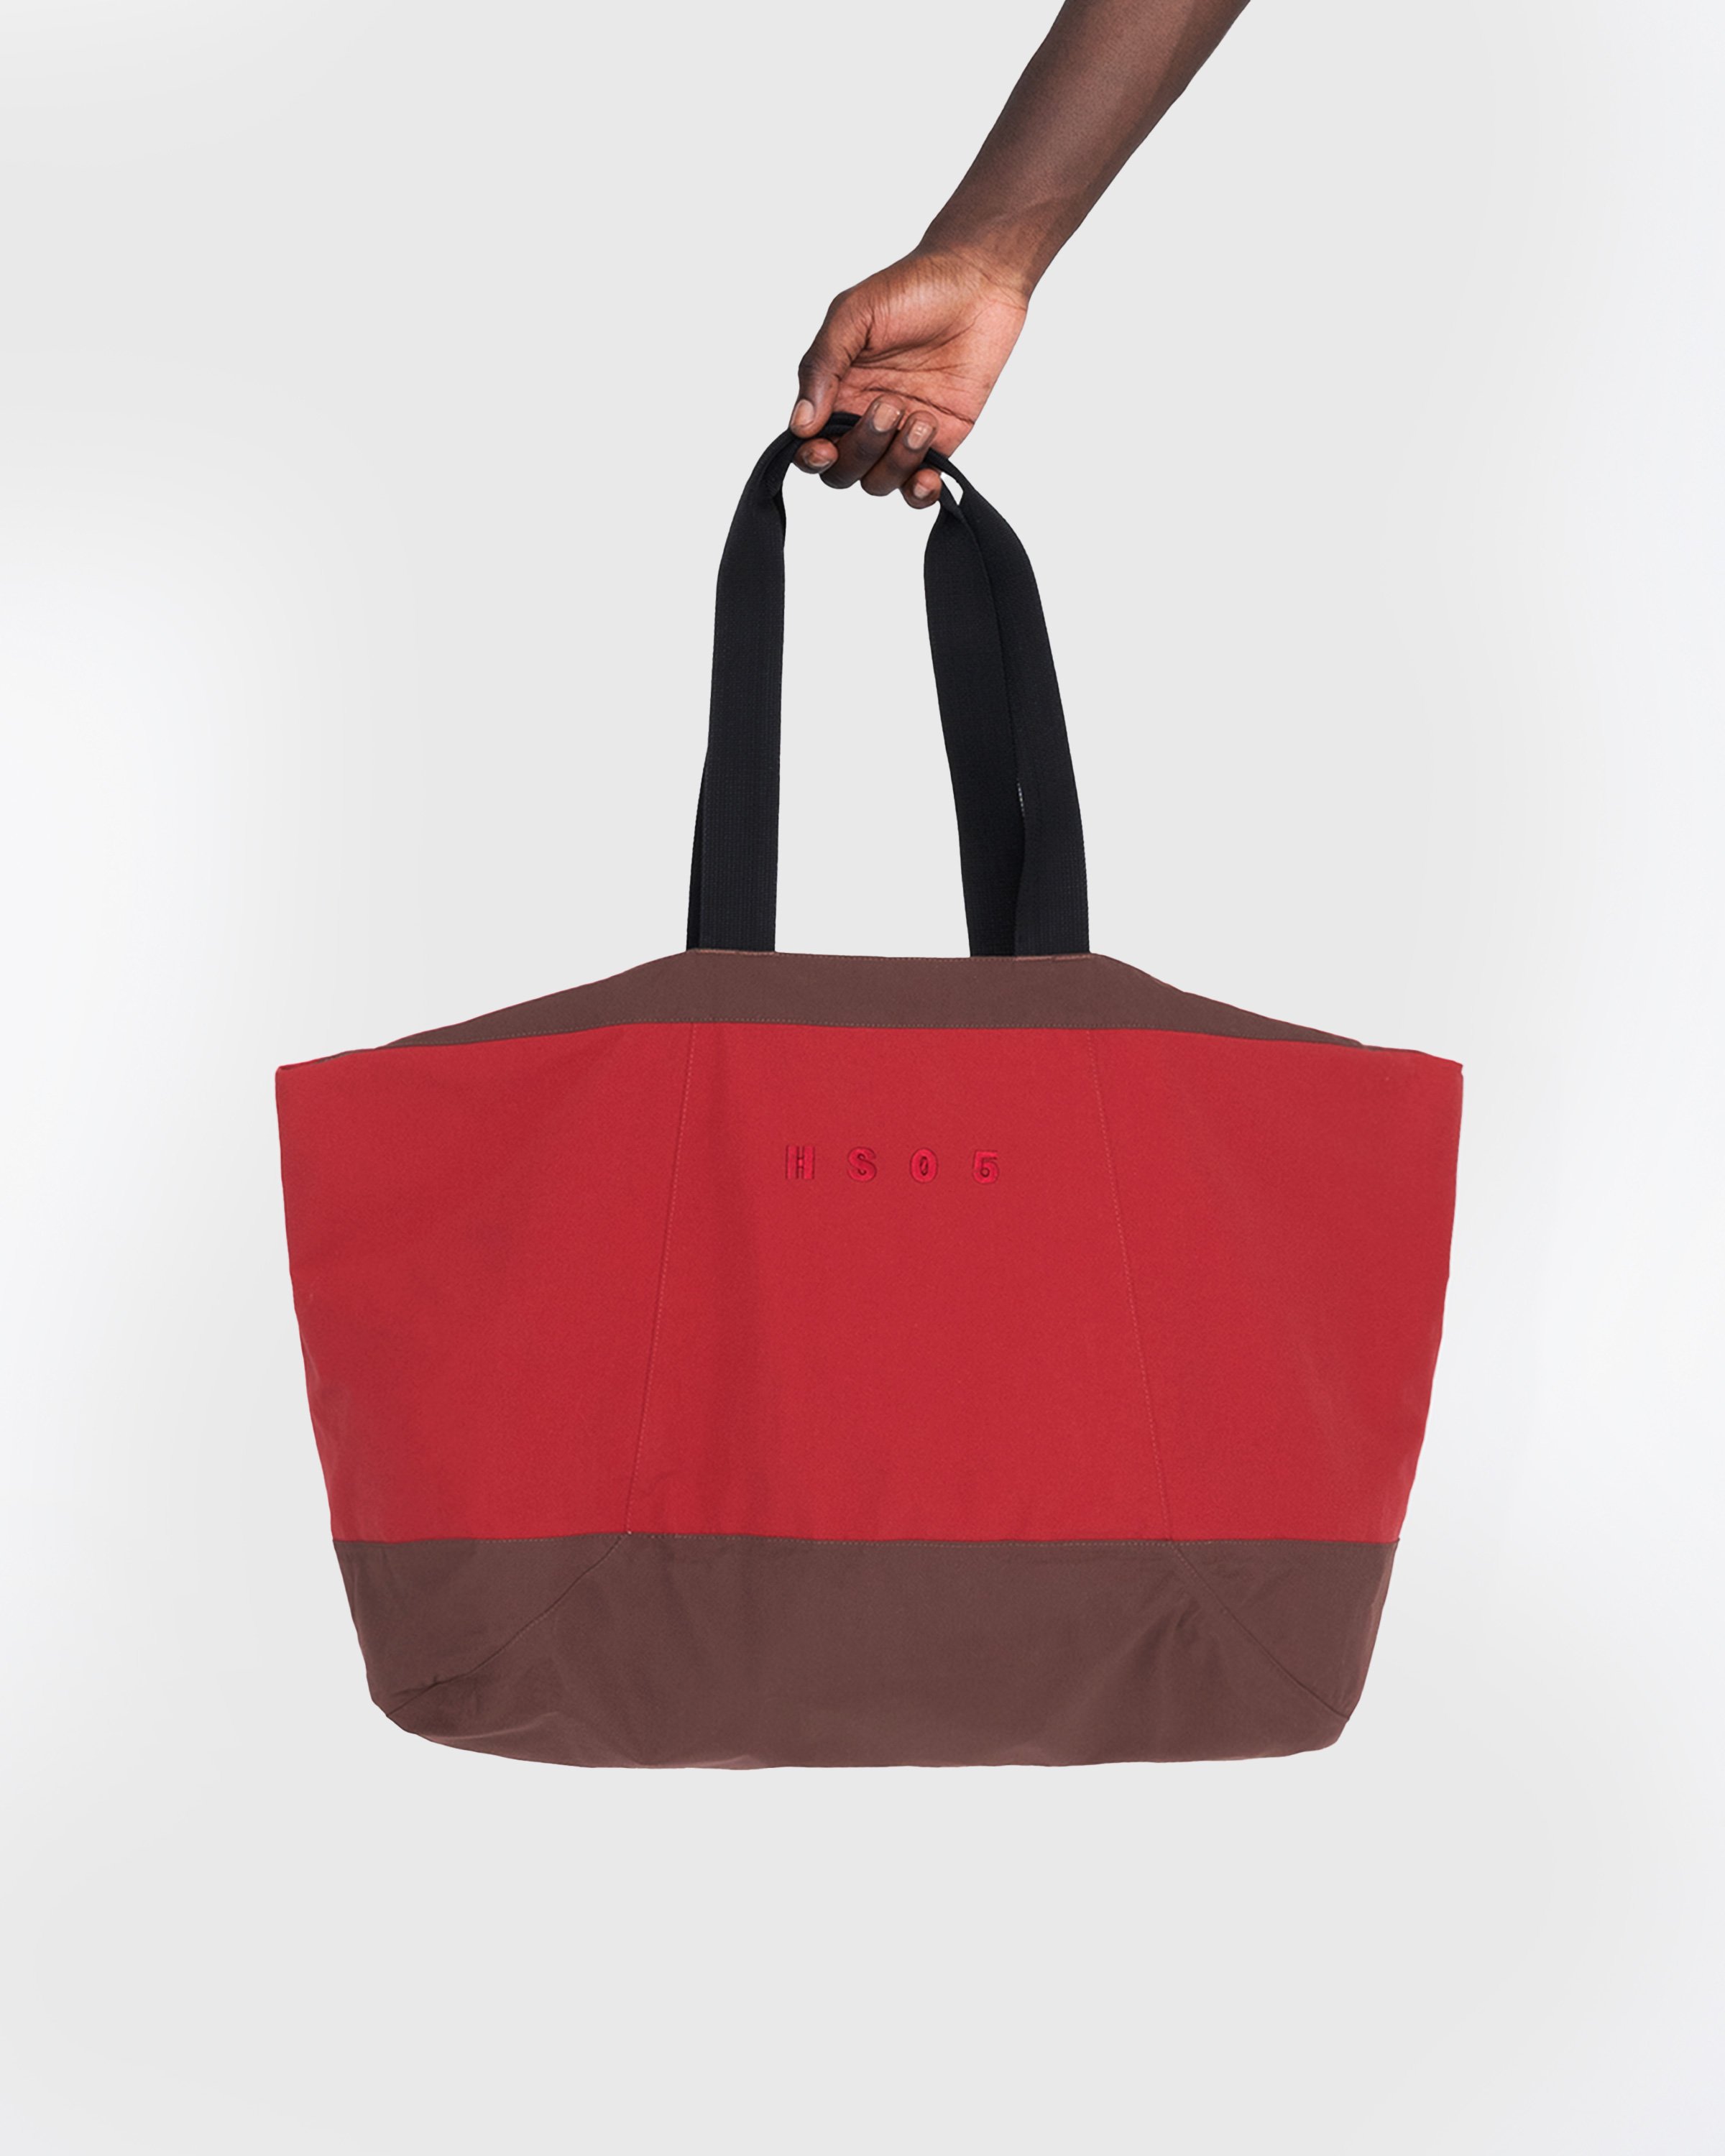 Highsnobiety HS05 - 3-Layer Nylon Tote Bag Red - Accessories - Red - Image 3